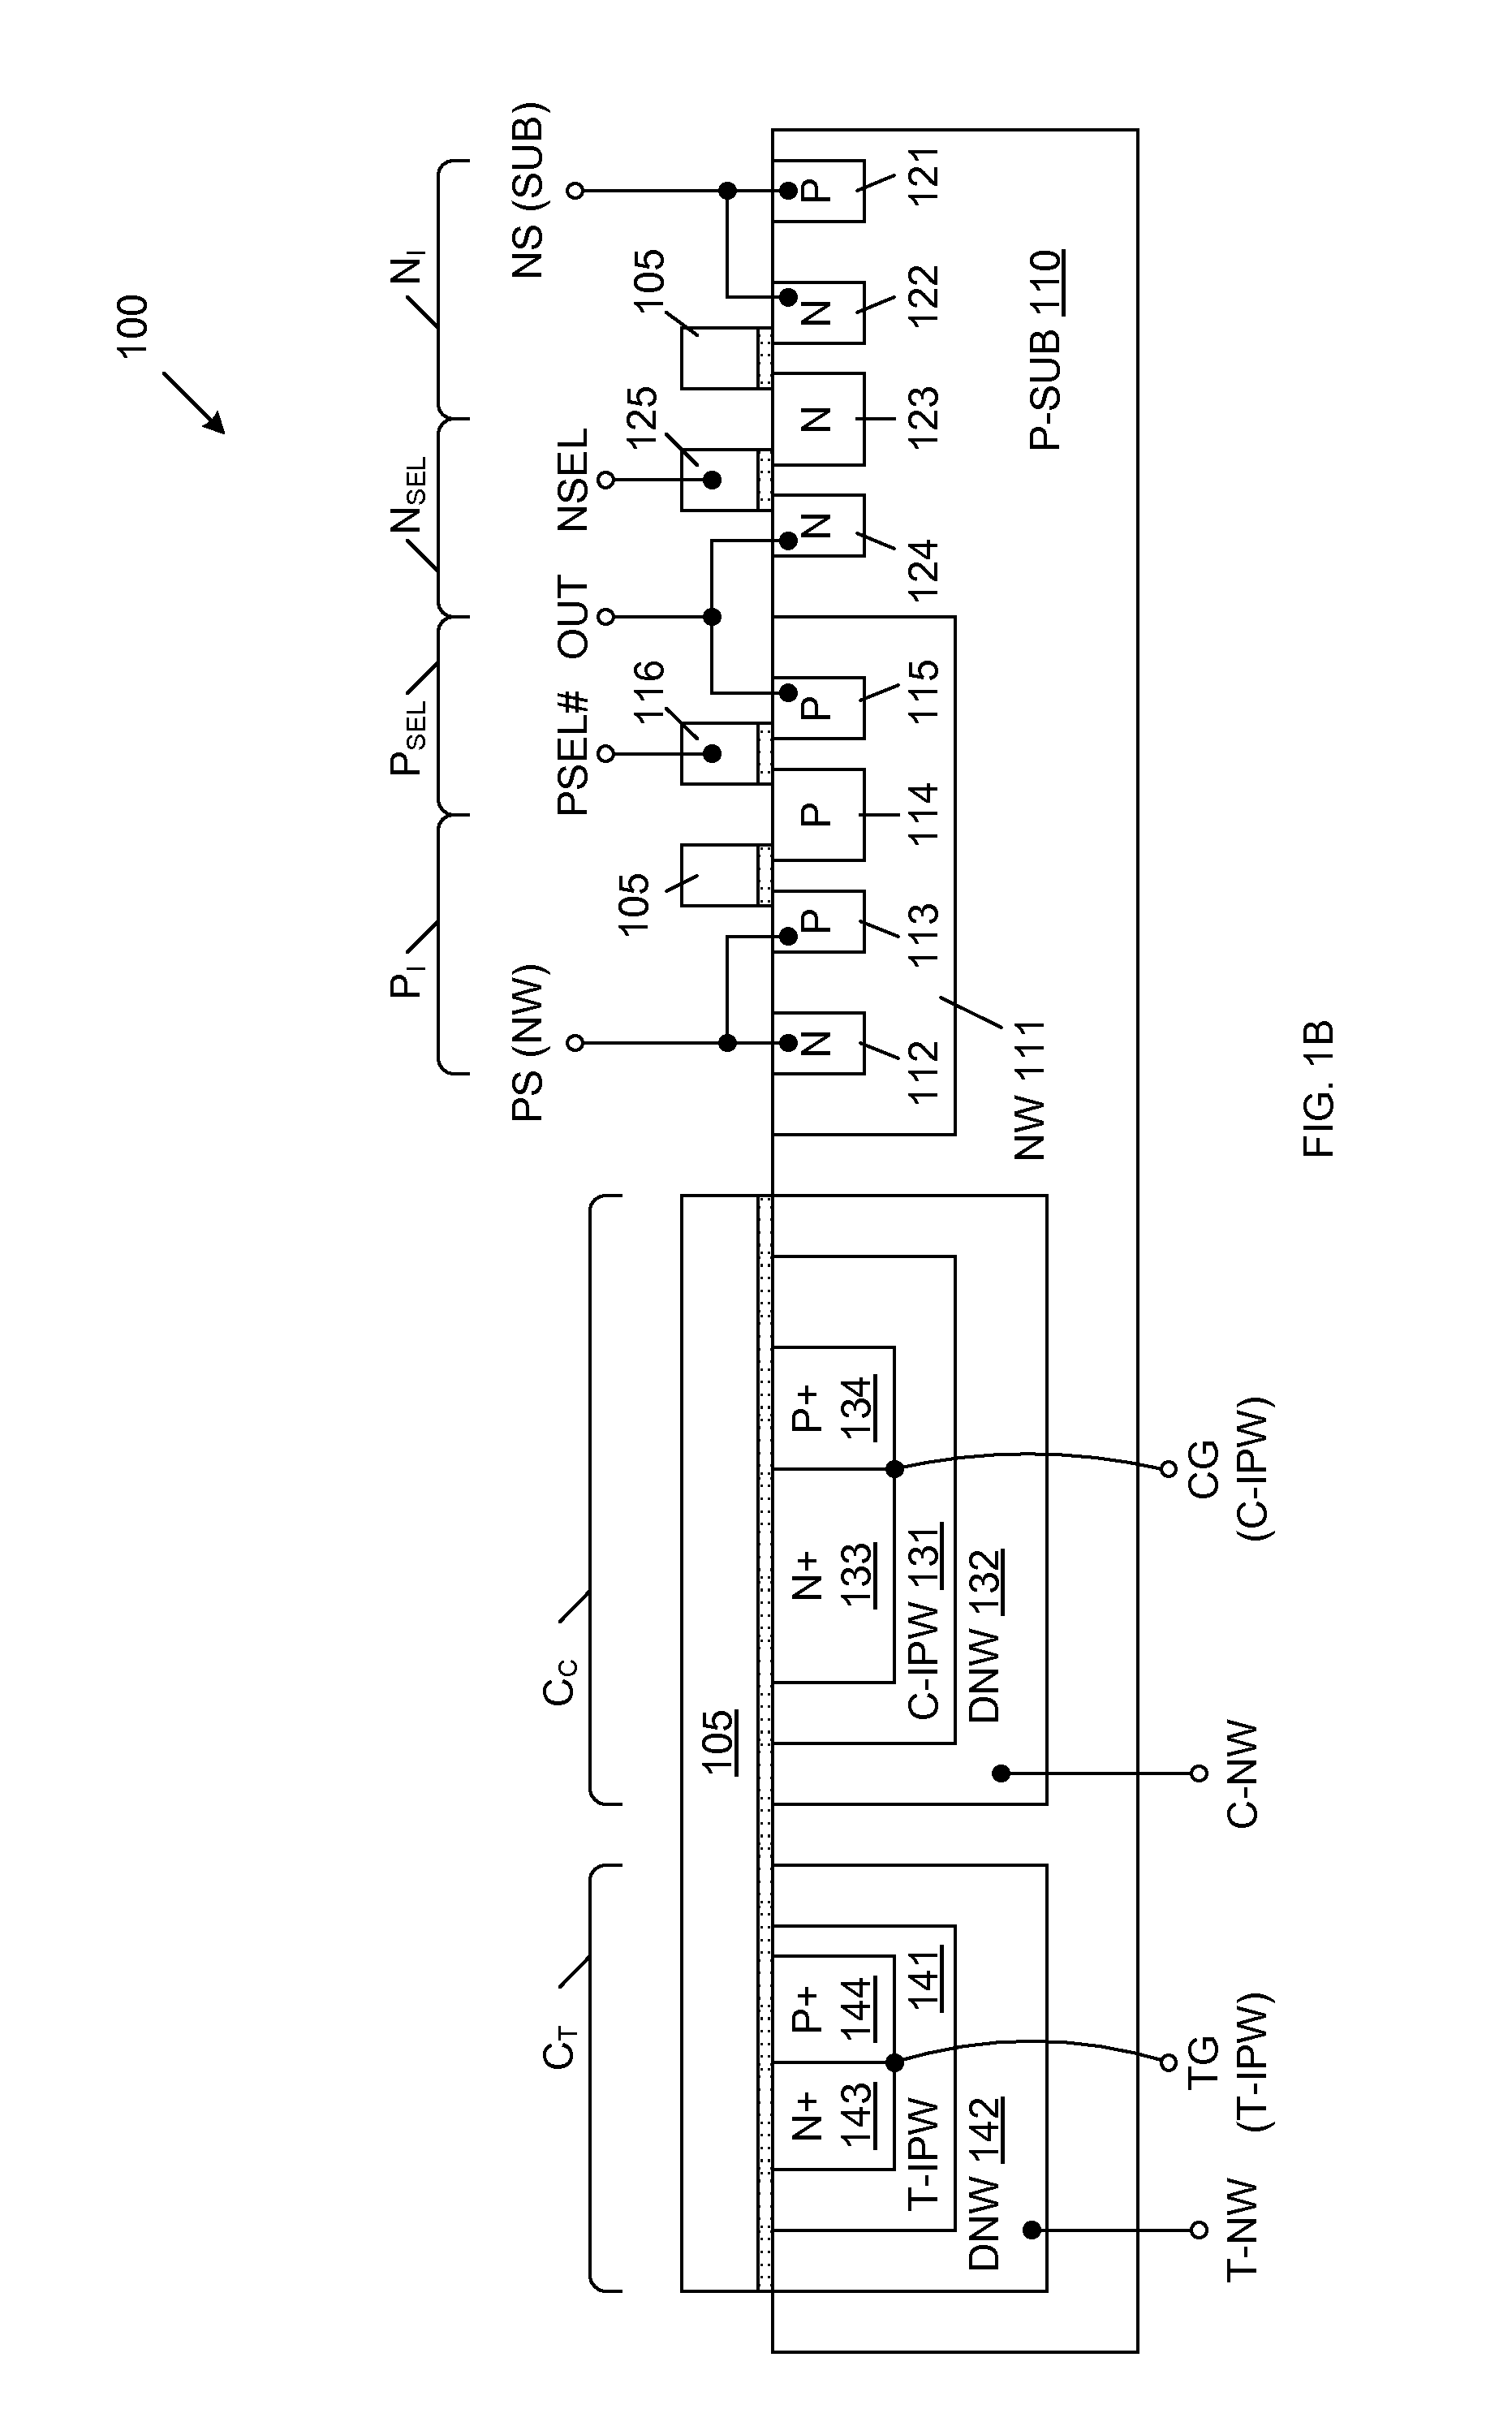 Floating gate inverter type memory cell and array